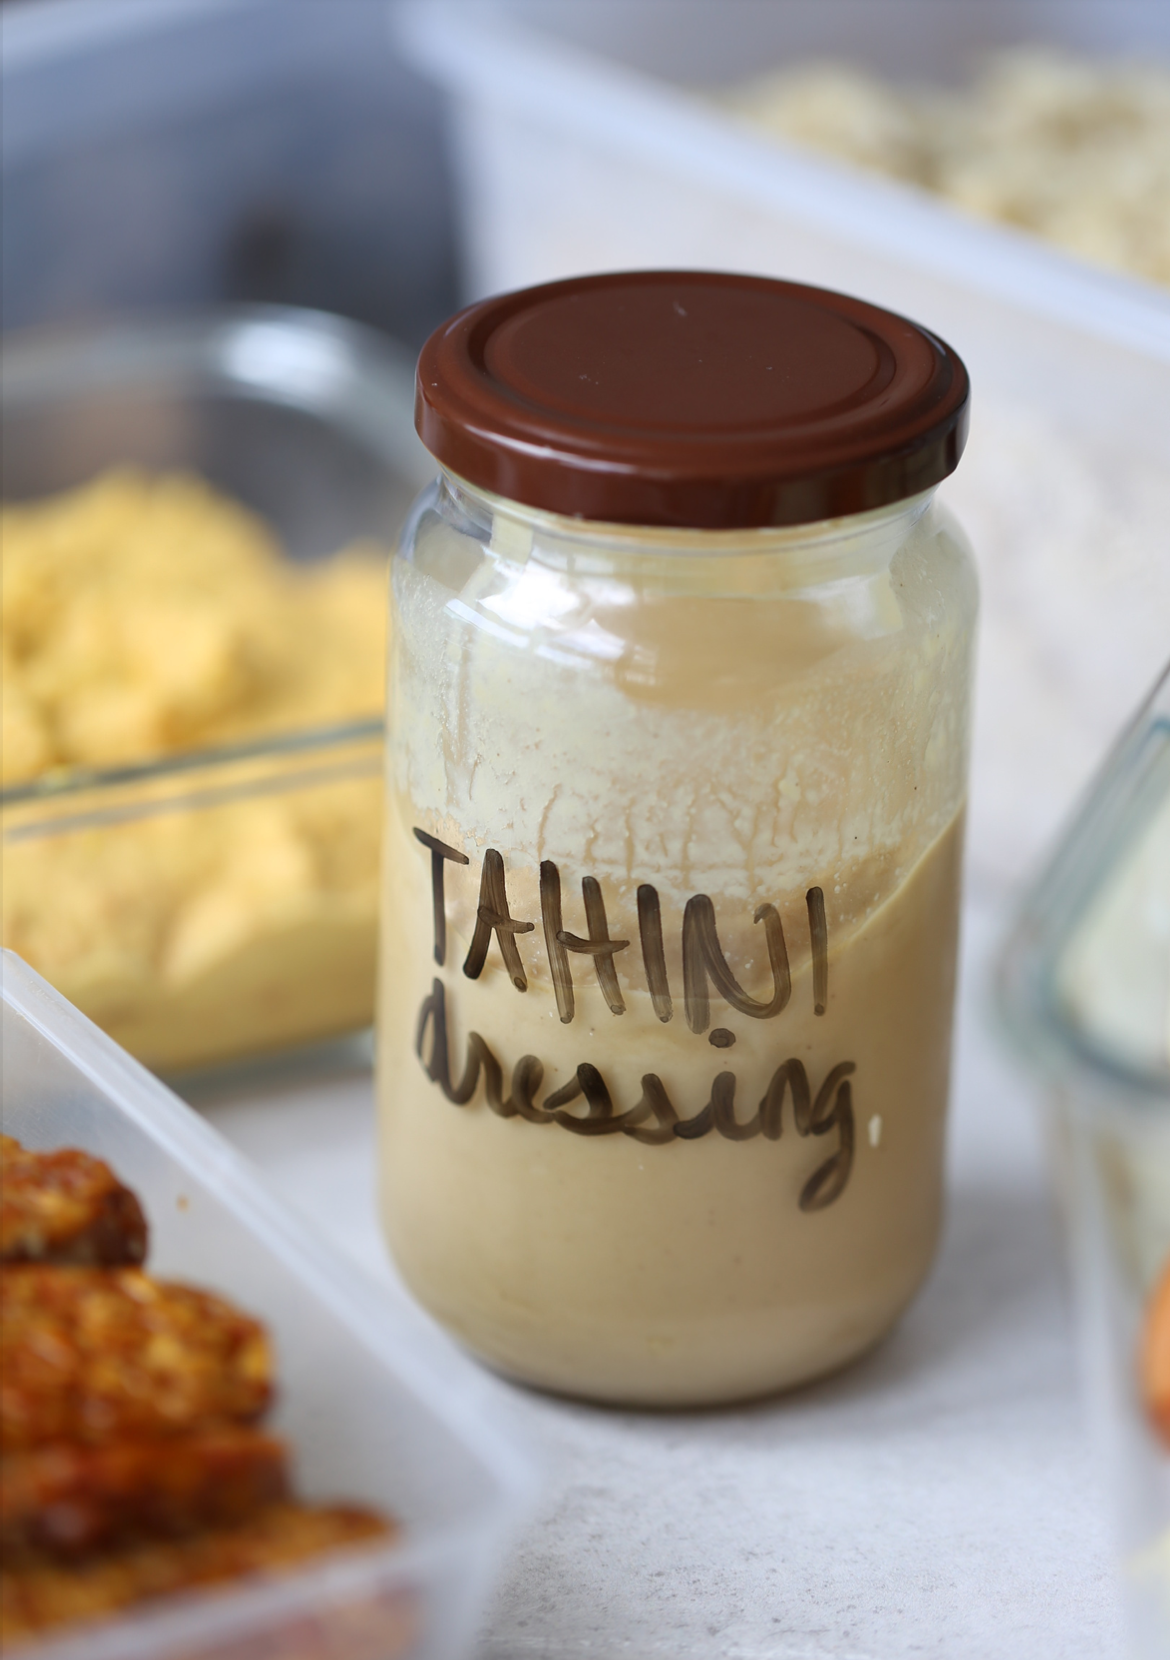 Tahini soy dressing, or Crack Sauce, in a glass jar with a brown lid and other meal prepped foods in the background. 